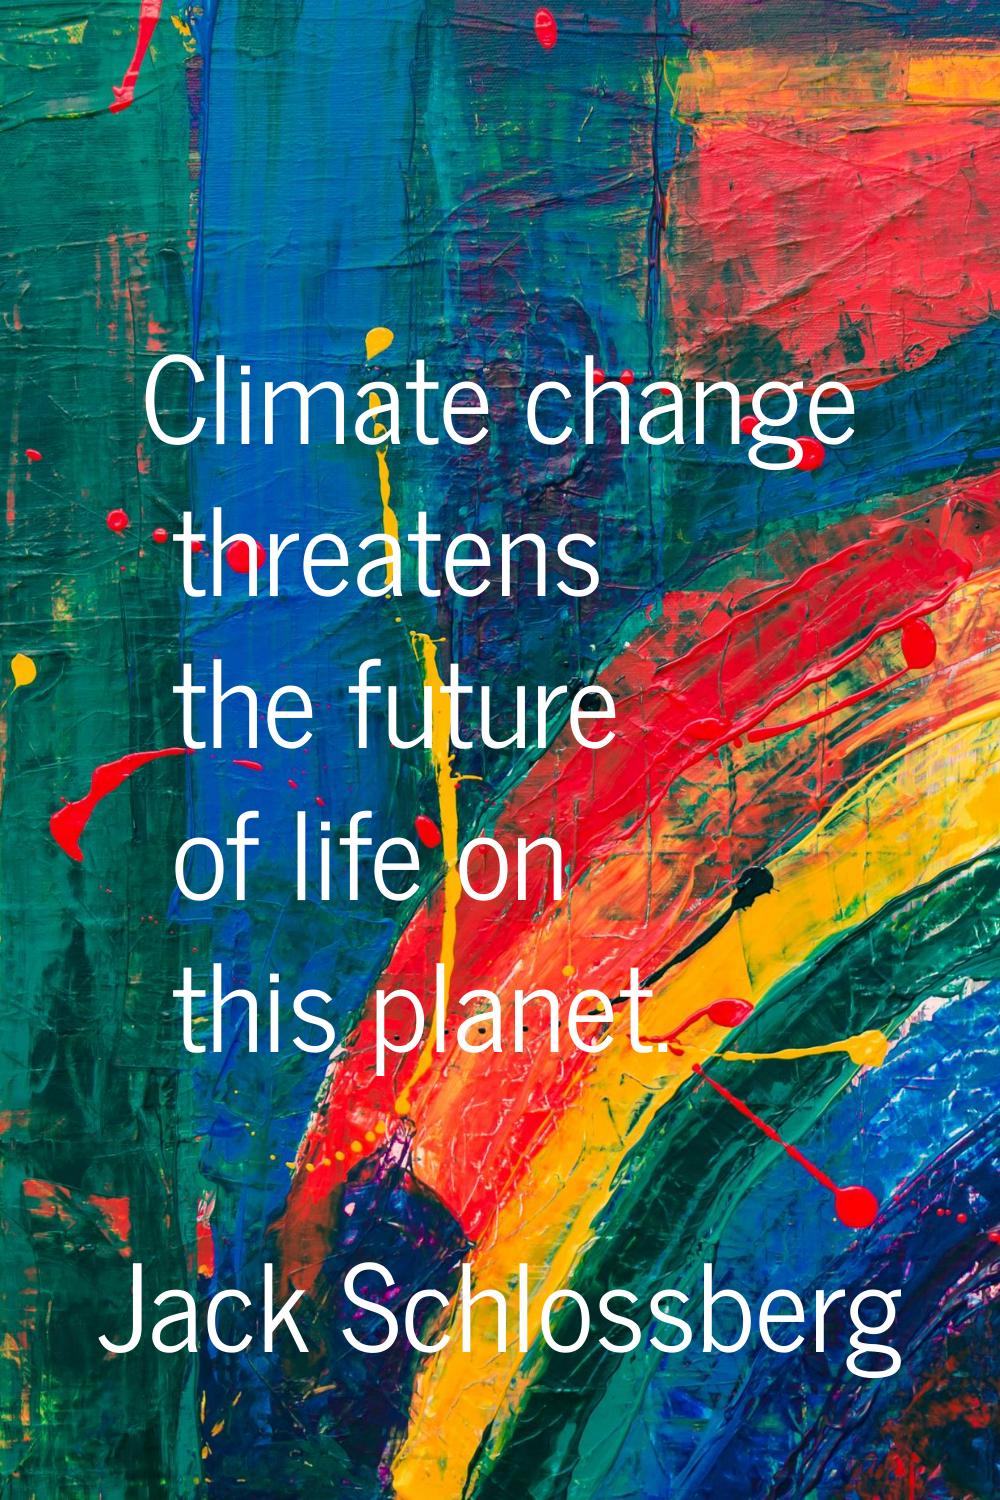 Climate change threatens the future of life on this planet.